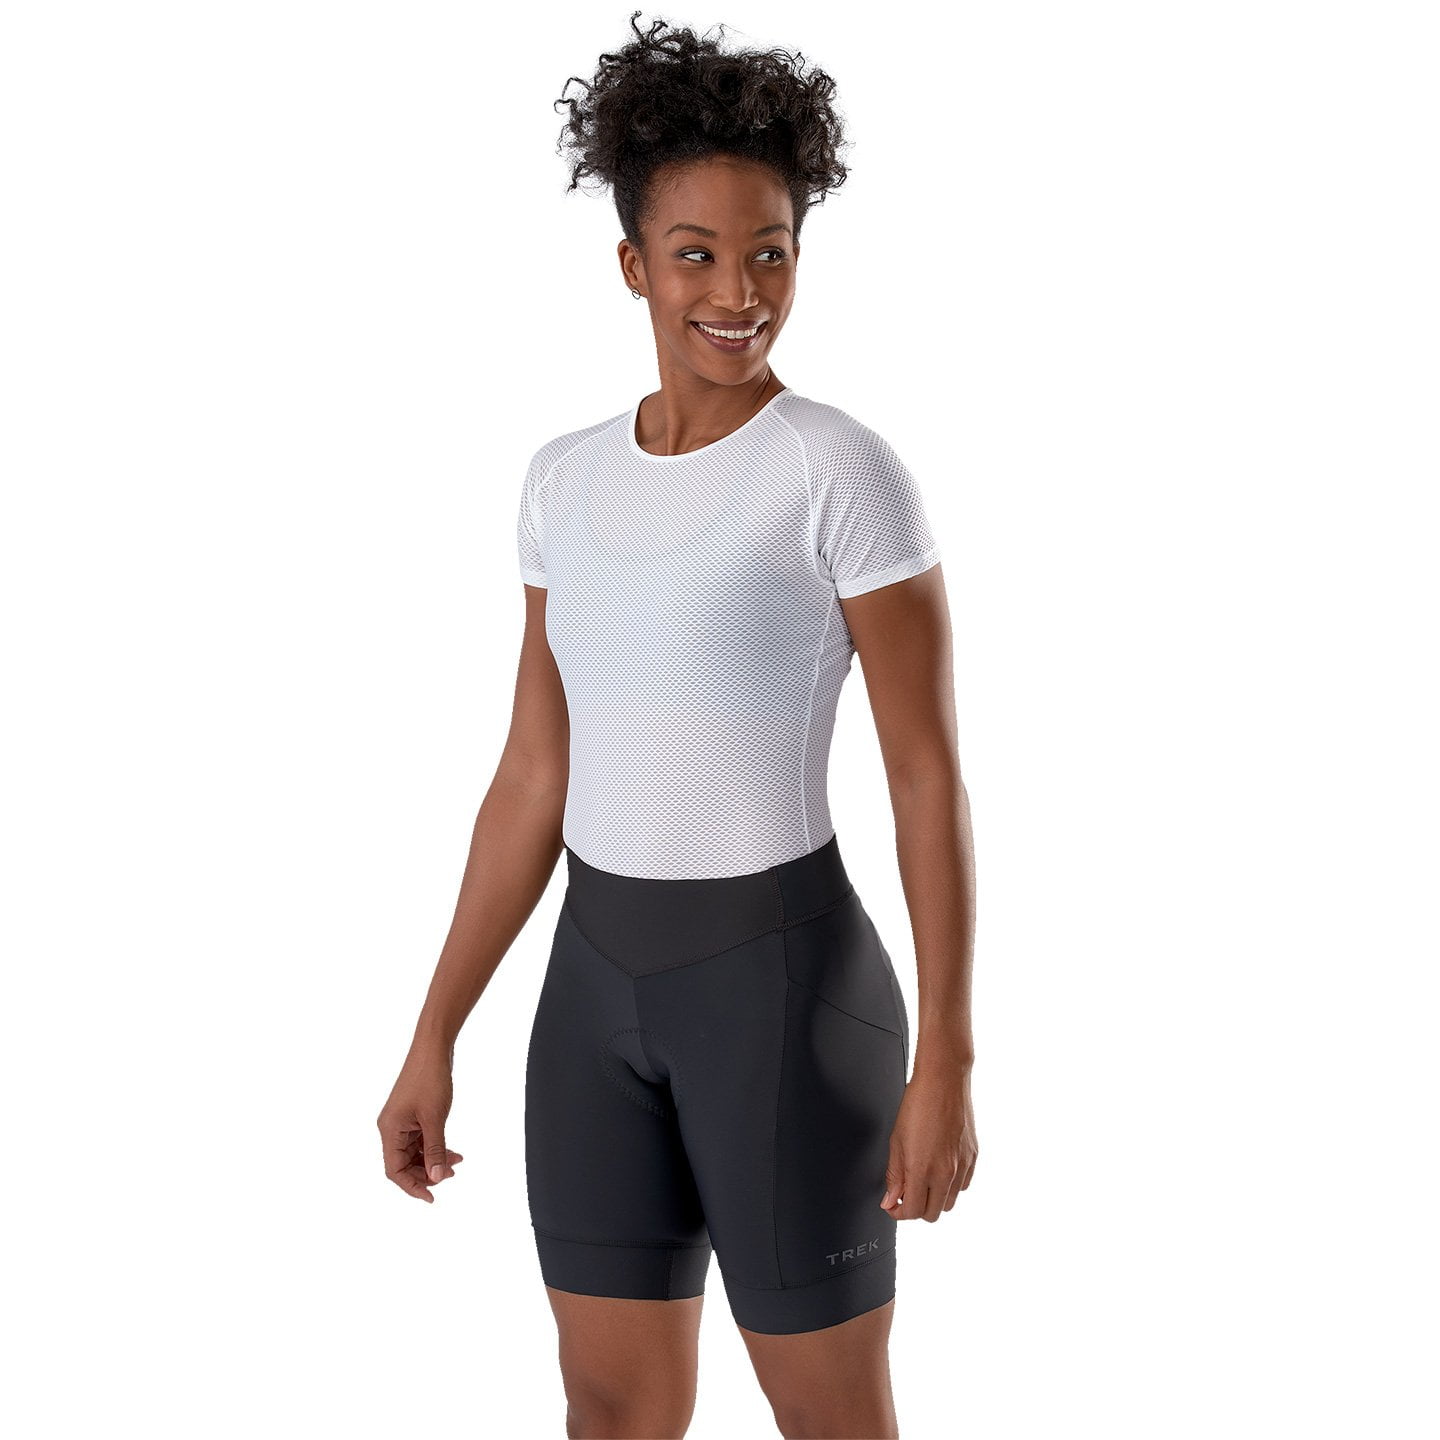 TREK Circuit Women’s Cycling Tights Women’s Cycling Shorts, size S, Cycle trousers, Cycle clothing